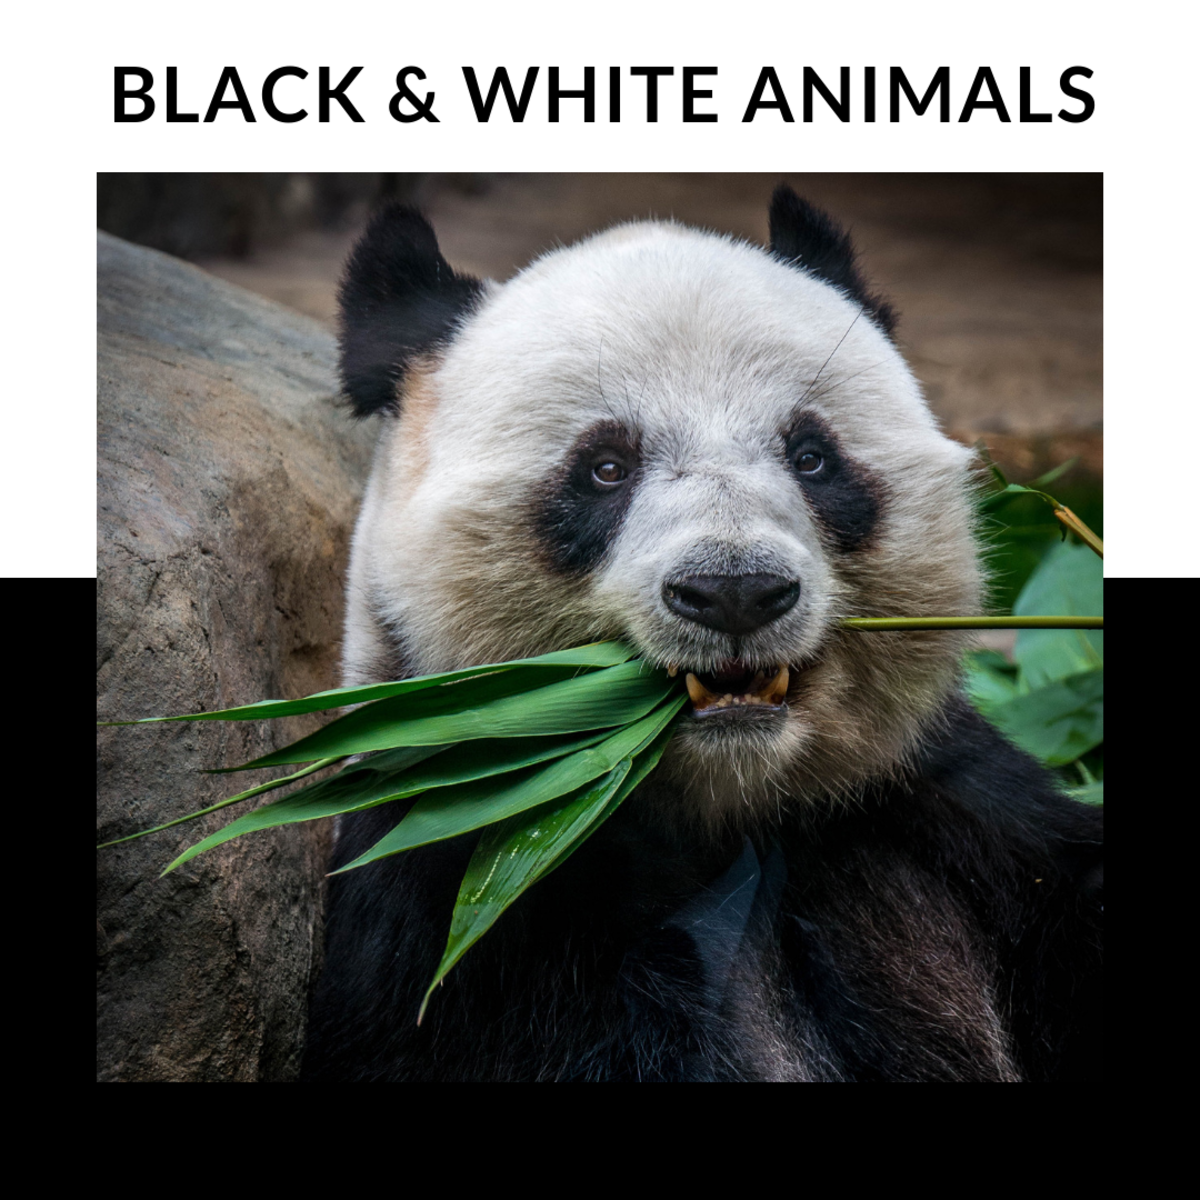 20 Black And White Animals With Names Pictures And Facts